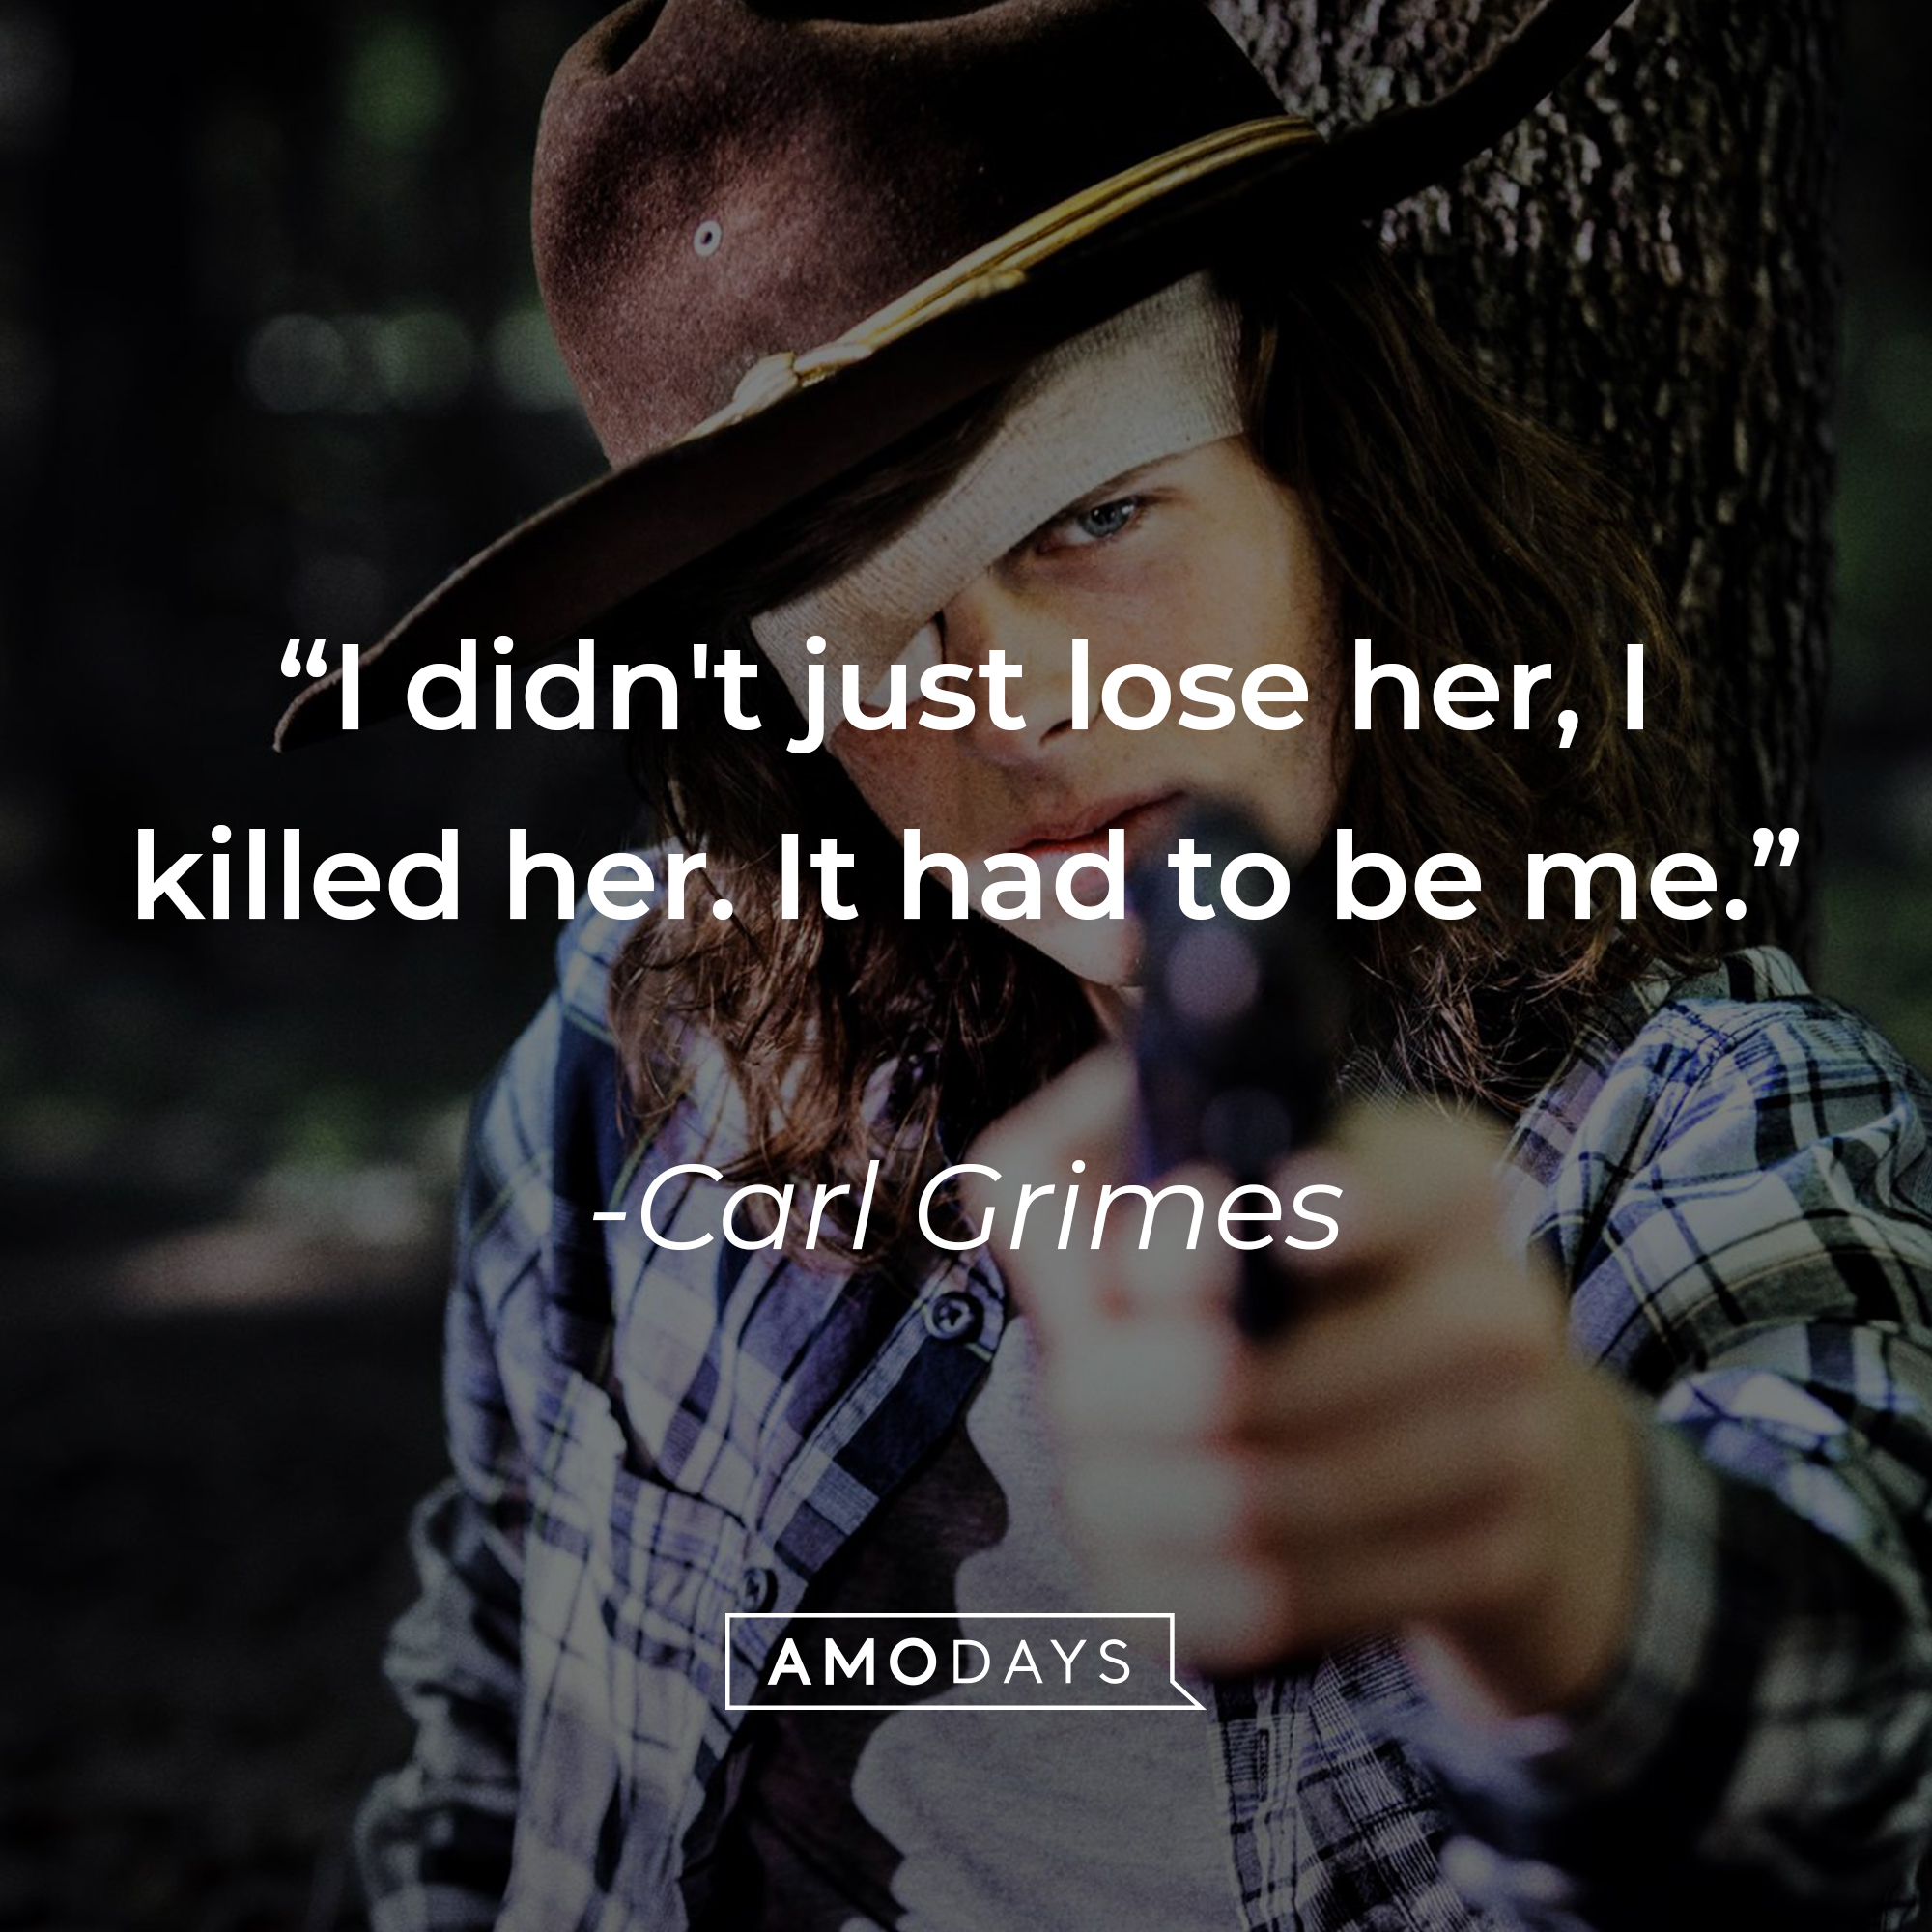 Carl Grimes,  with his quote: “I didn't just lose her, I killed her. It had to be me.” | Source: facebook.com/TheWalkingDeadAMC